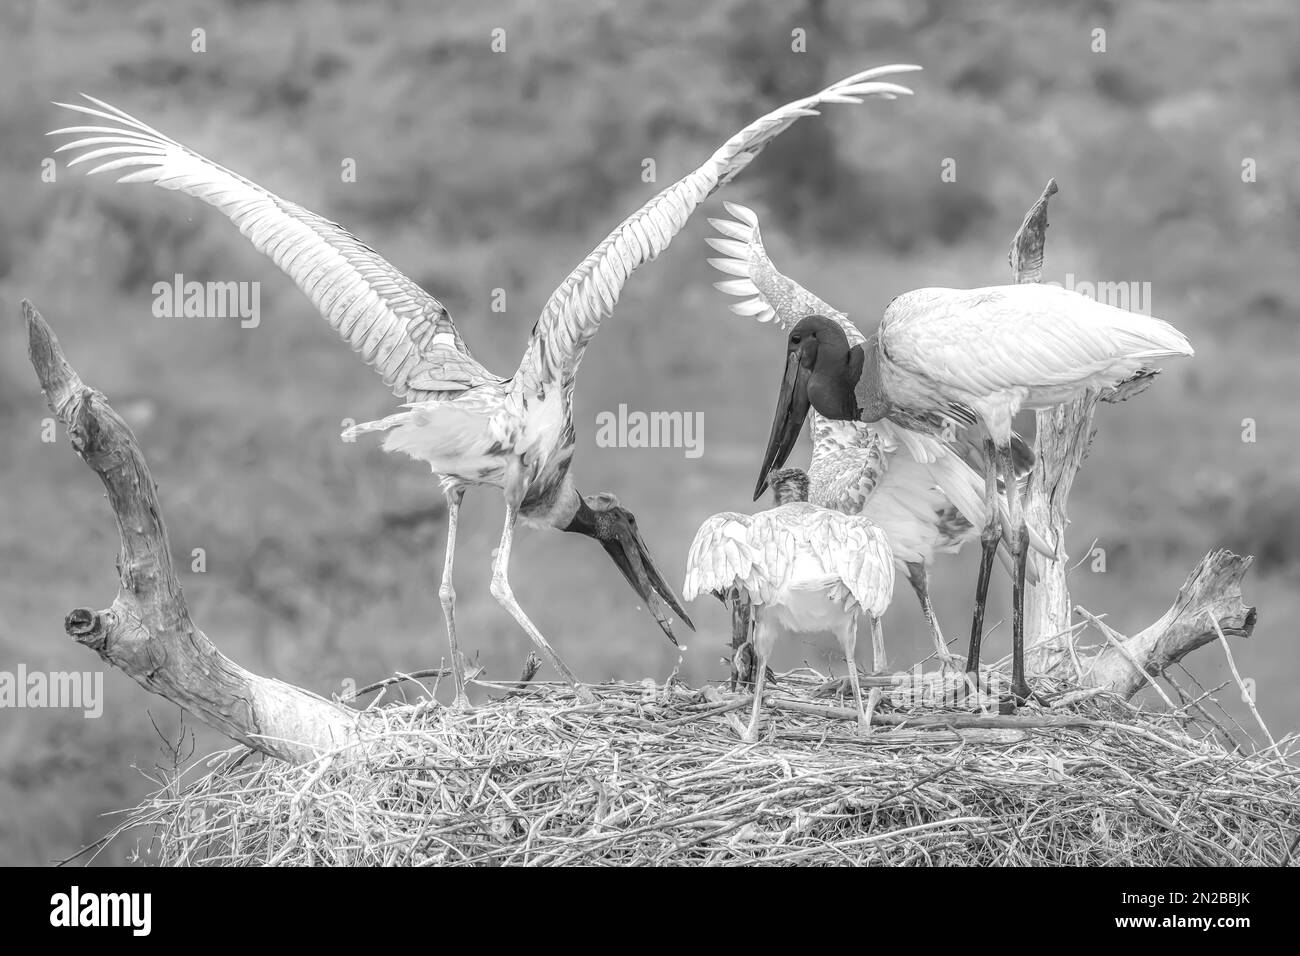 Jabiru storks contesting a catfish meal on their nest- black and white image Stock Photo